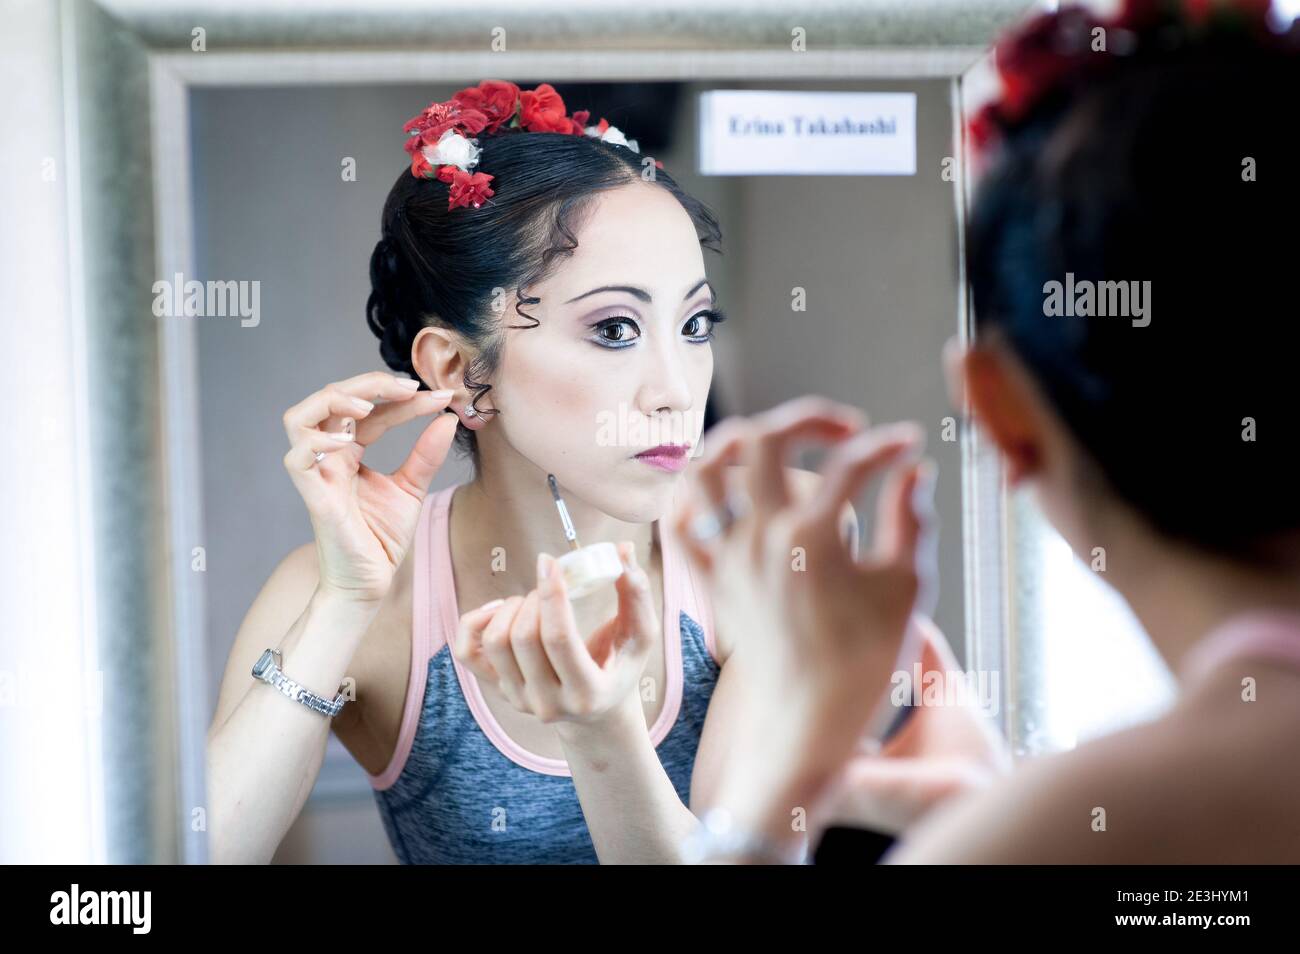 Ballerina Erina Takahashi does her make-up in the dressing room mirror before a performance Stock Photo